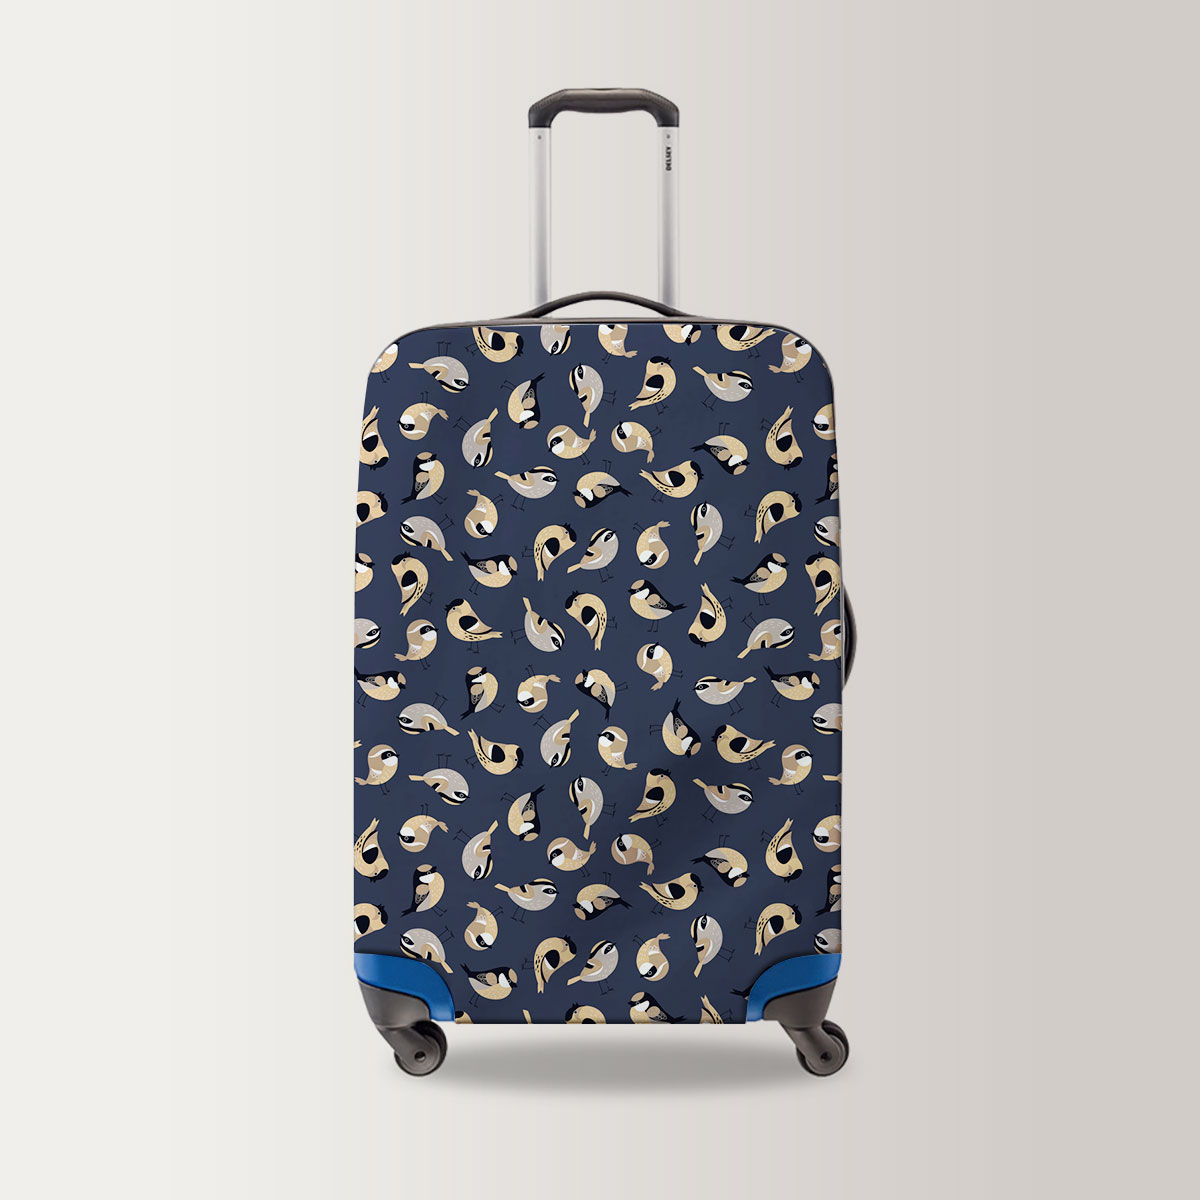 Coon Illustration Finch Luggage Bag